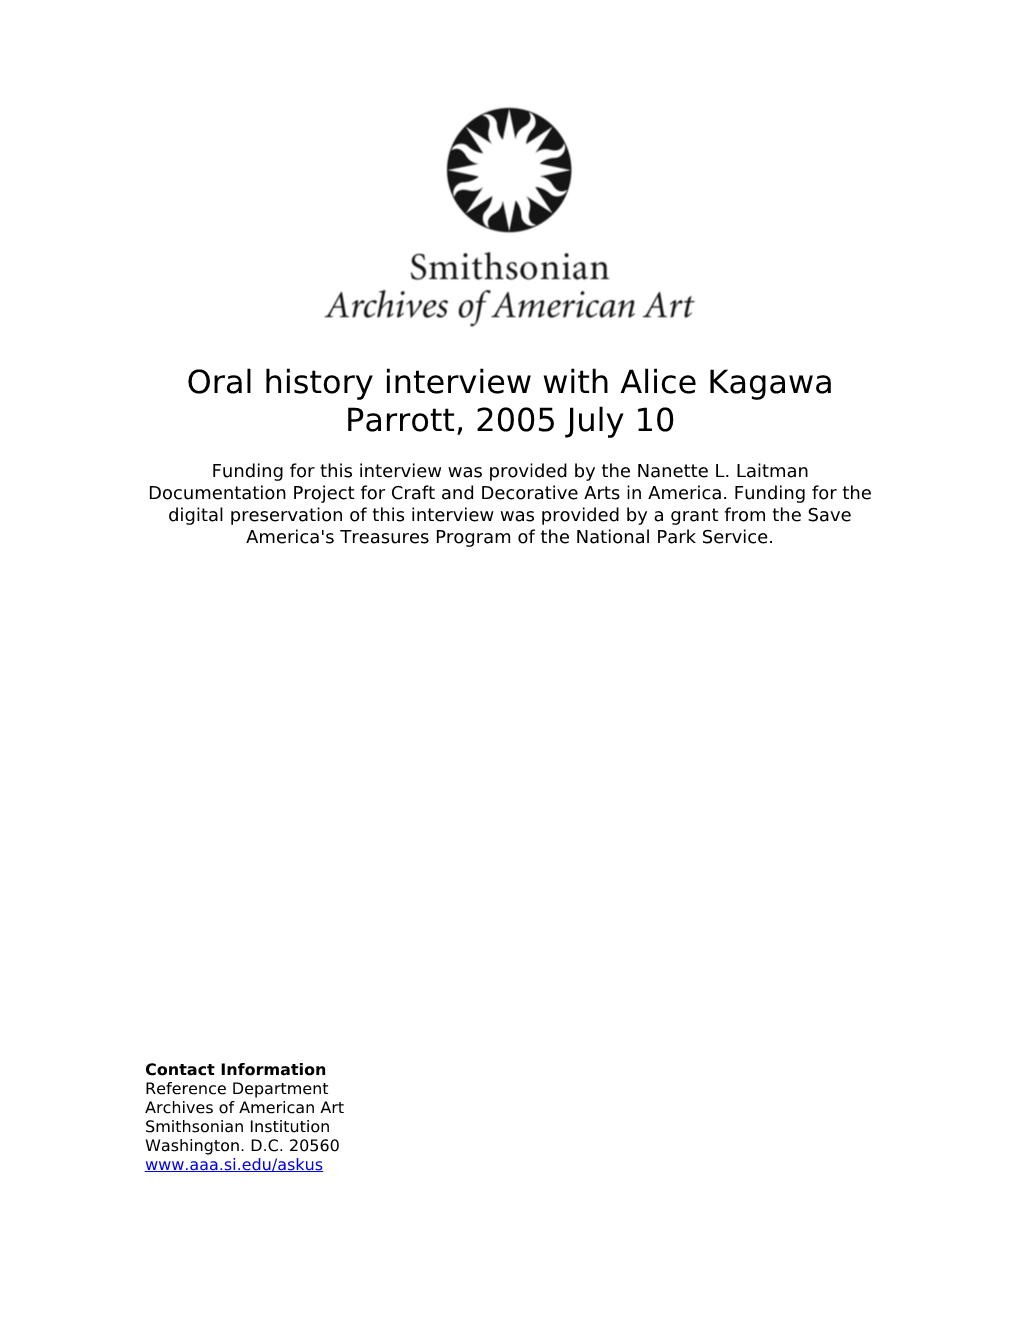 Oral History Interview with Alice Kagawa Parrott, 2005 July 10